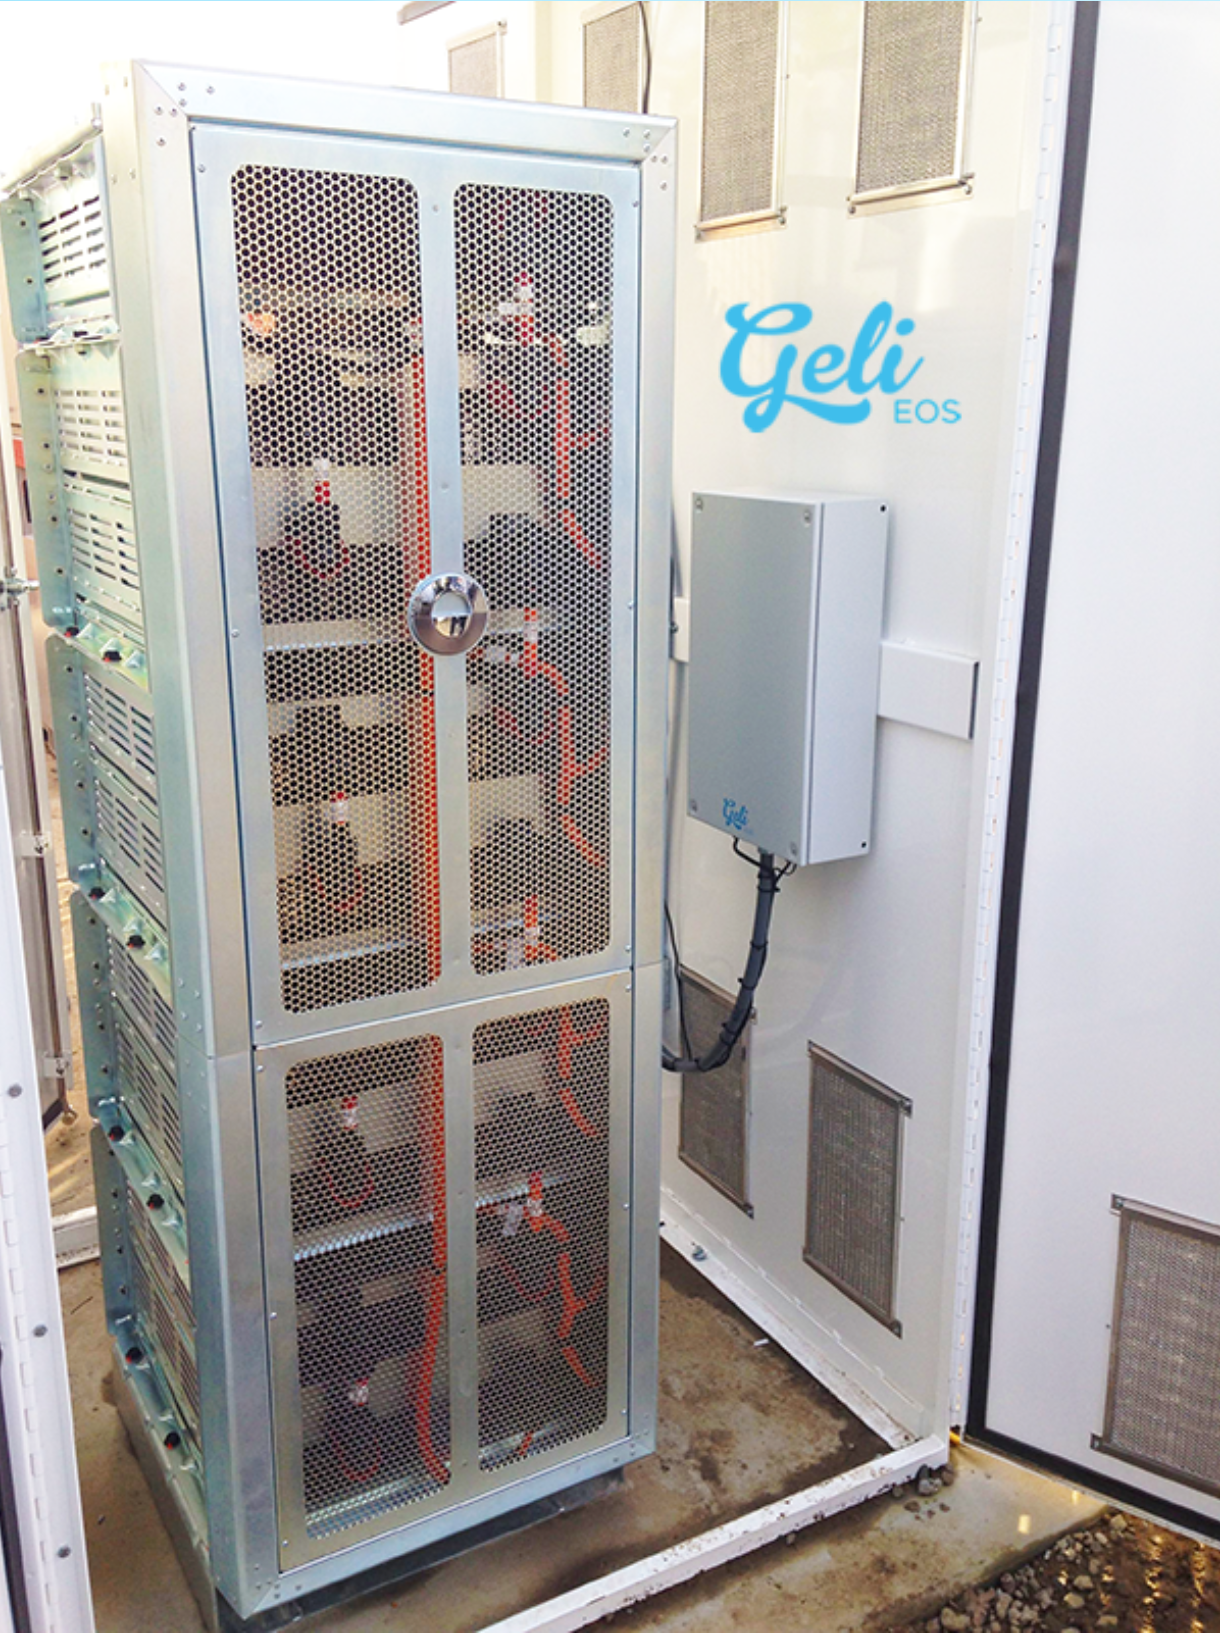 Geli EOS (Energy Operating System) and Coda CORE Energy Storage System (ESS)